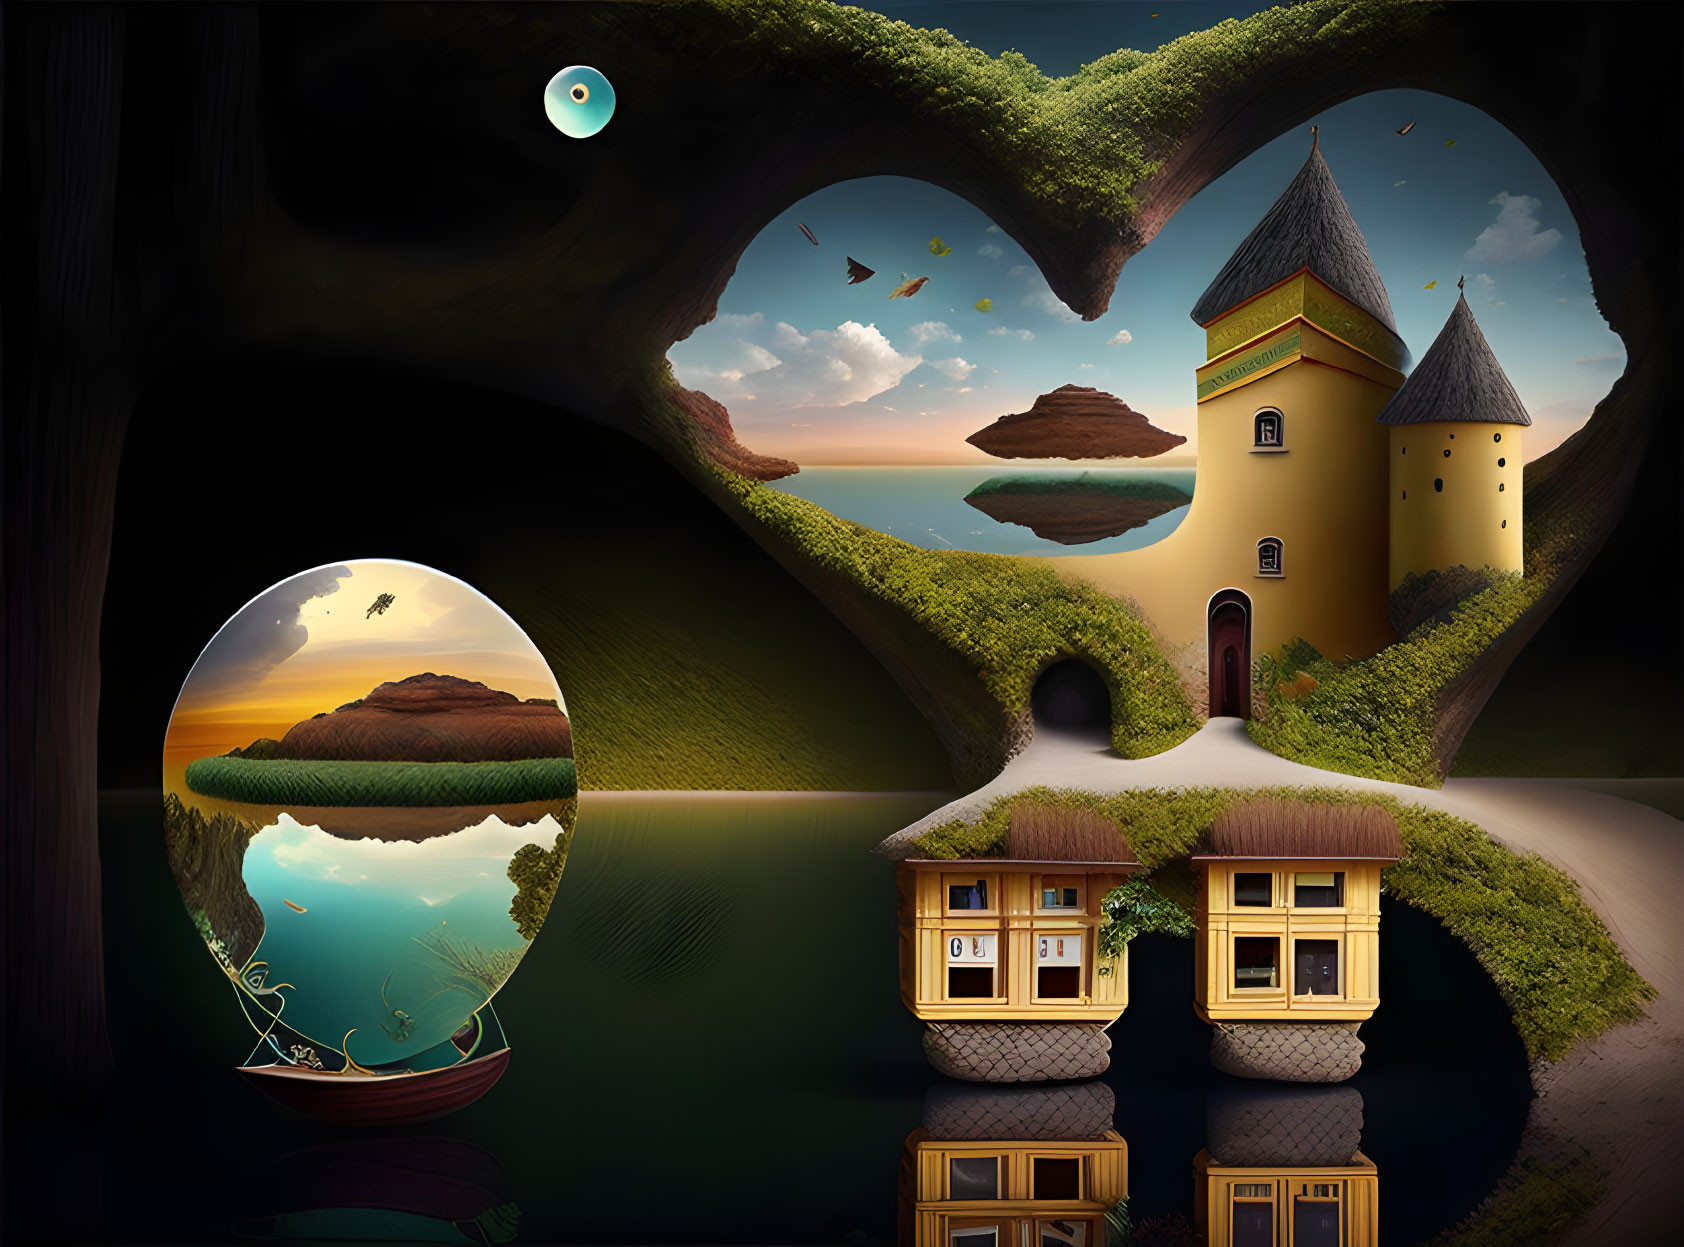 Surreal landscape with heart-shaped tree, castle, floating islands, and portals